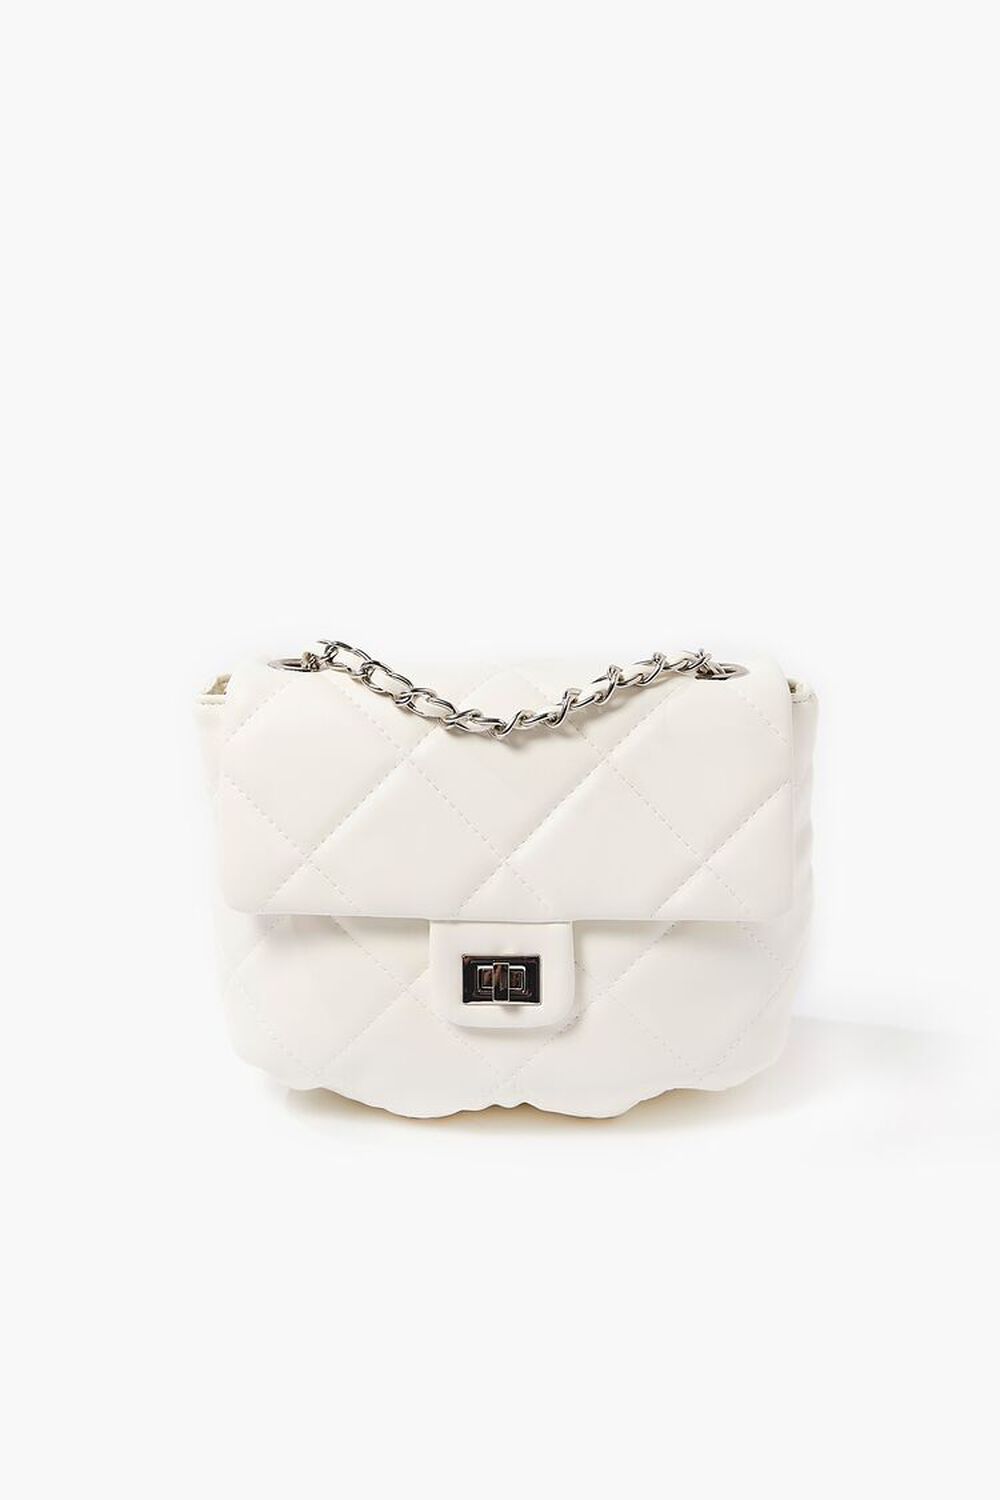 WHITE Quilted Faux Leather Crossbody Bag, image 1